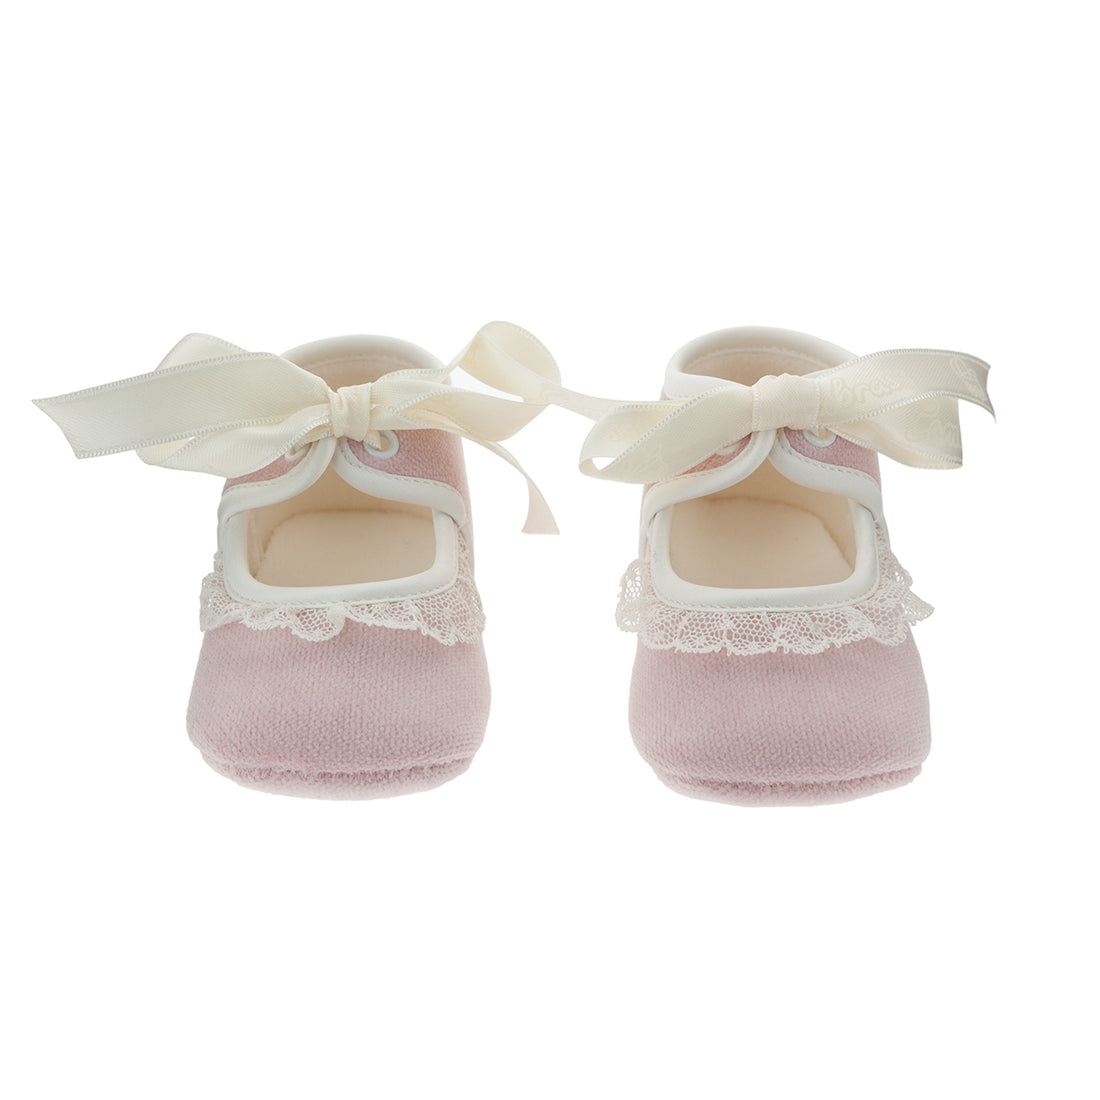 r&j-cambrass-sa-winter-baby-shoes-mod-597-947-pink- (1)